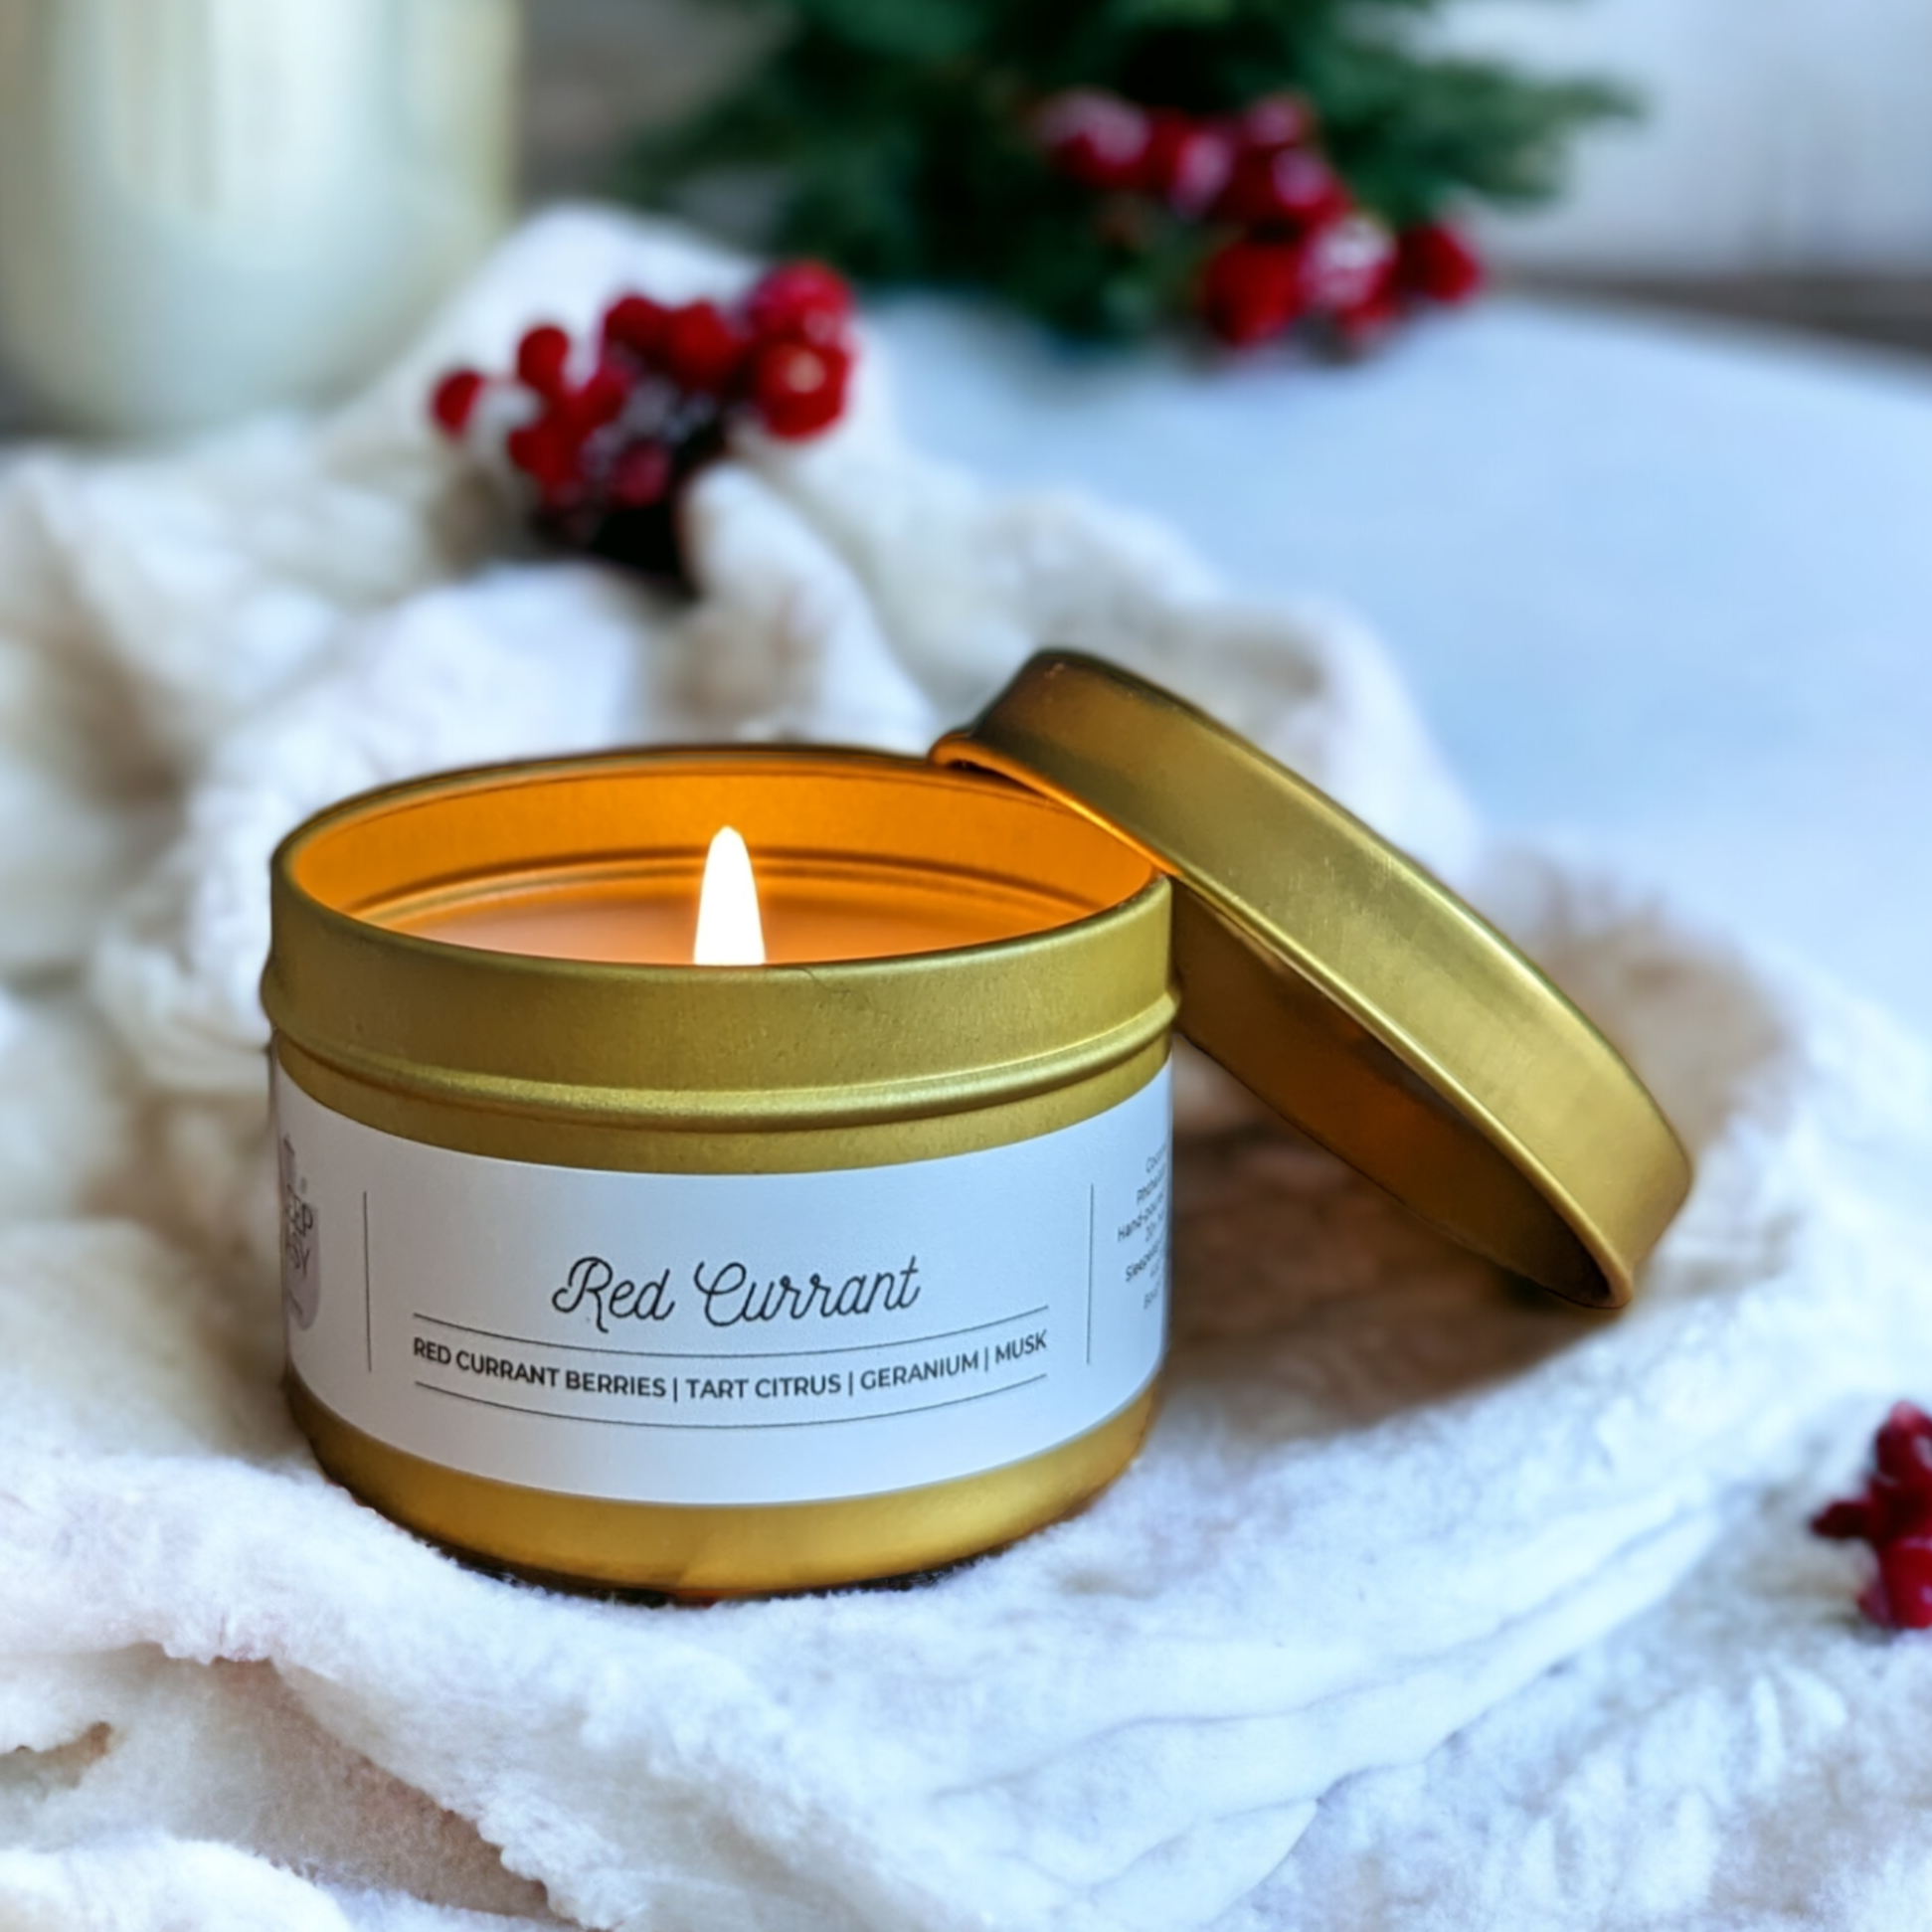 4oz gold travel tin candle displayed on a white blanket in front of red berries and pine bush. Red currant coocnut soy candle is inspired by Vovito Red Currant home fragrance. 